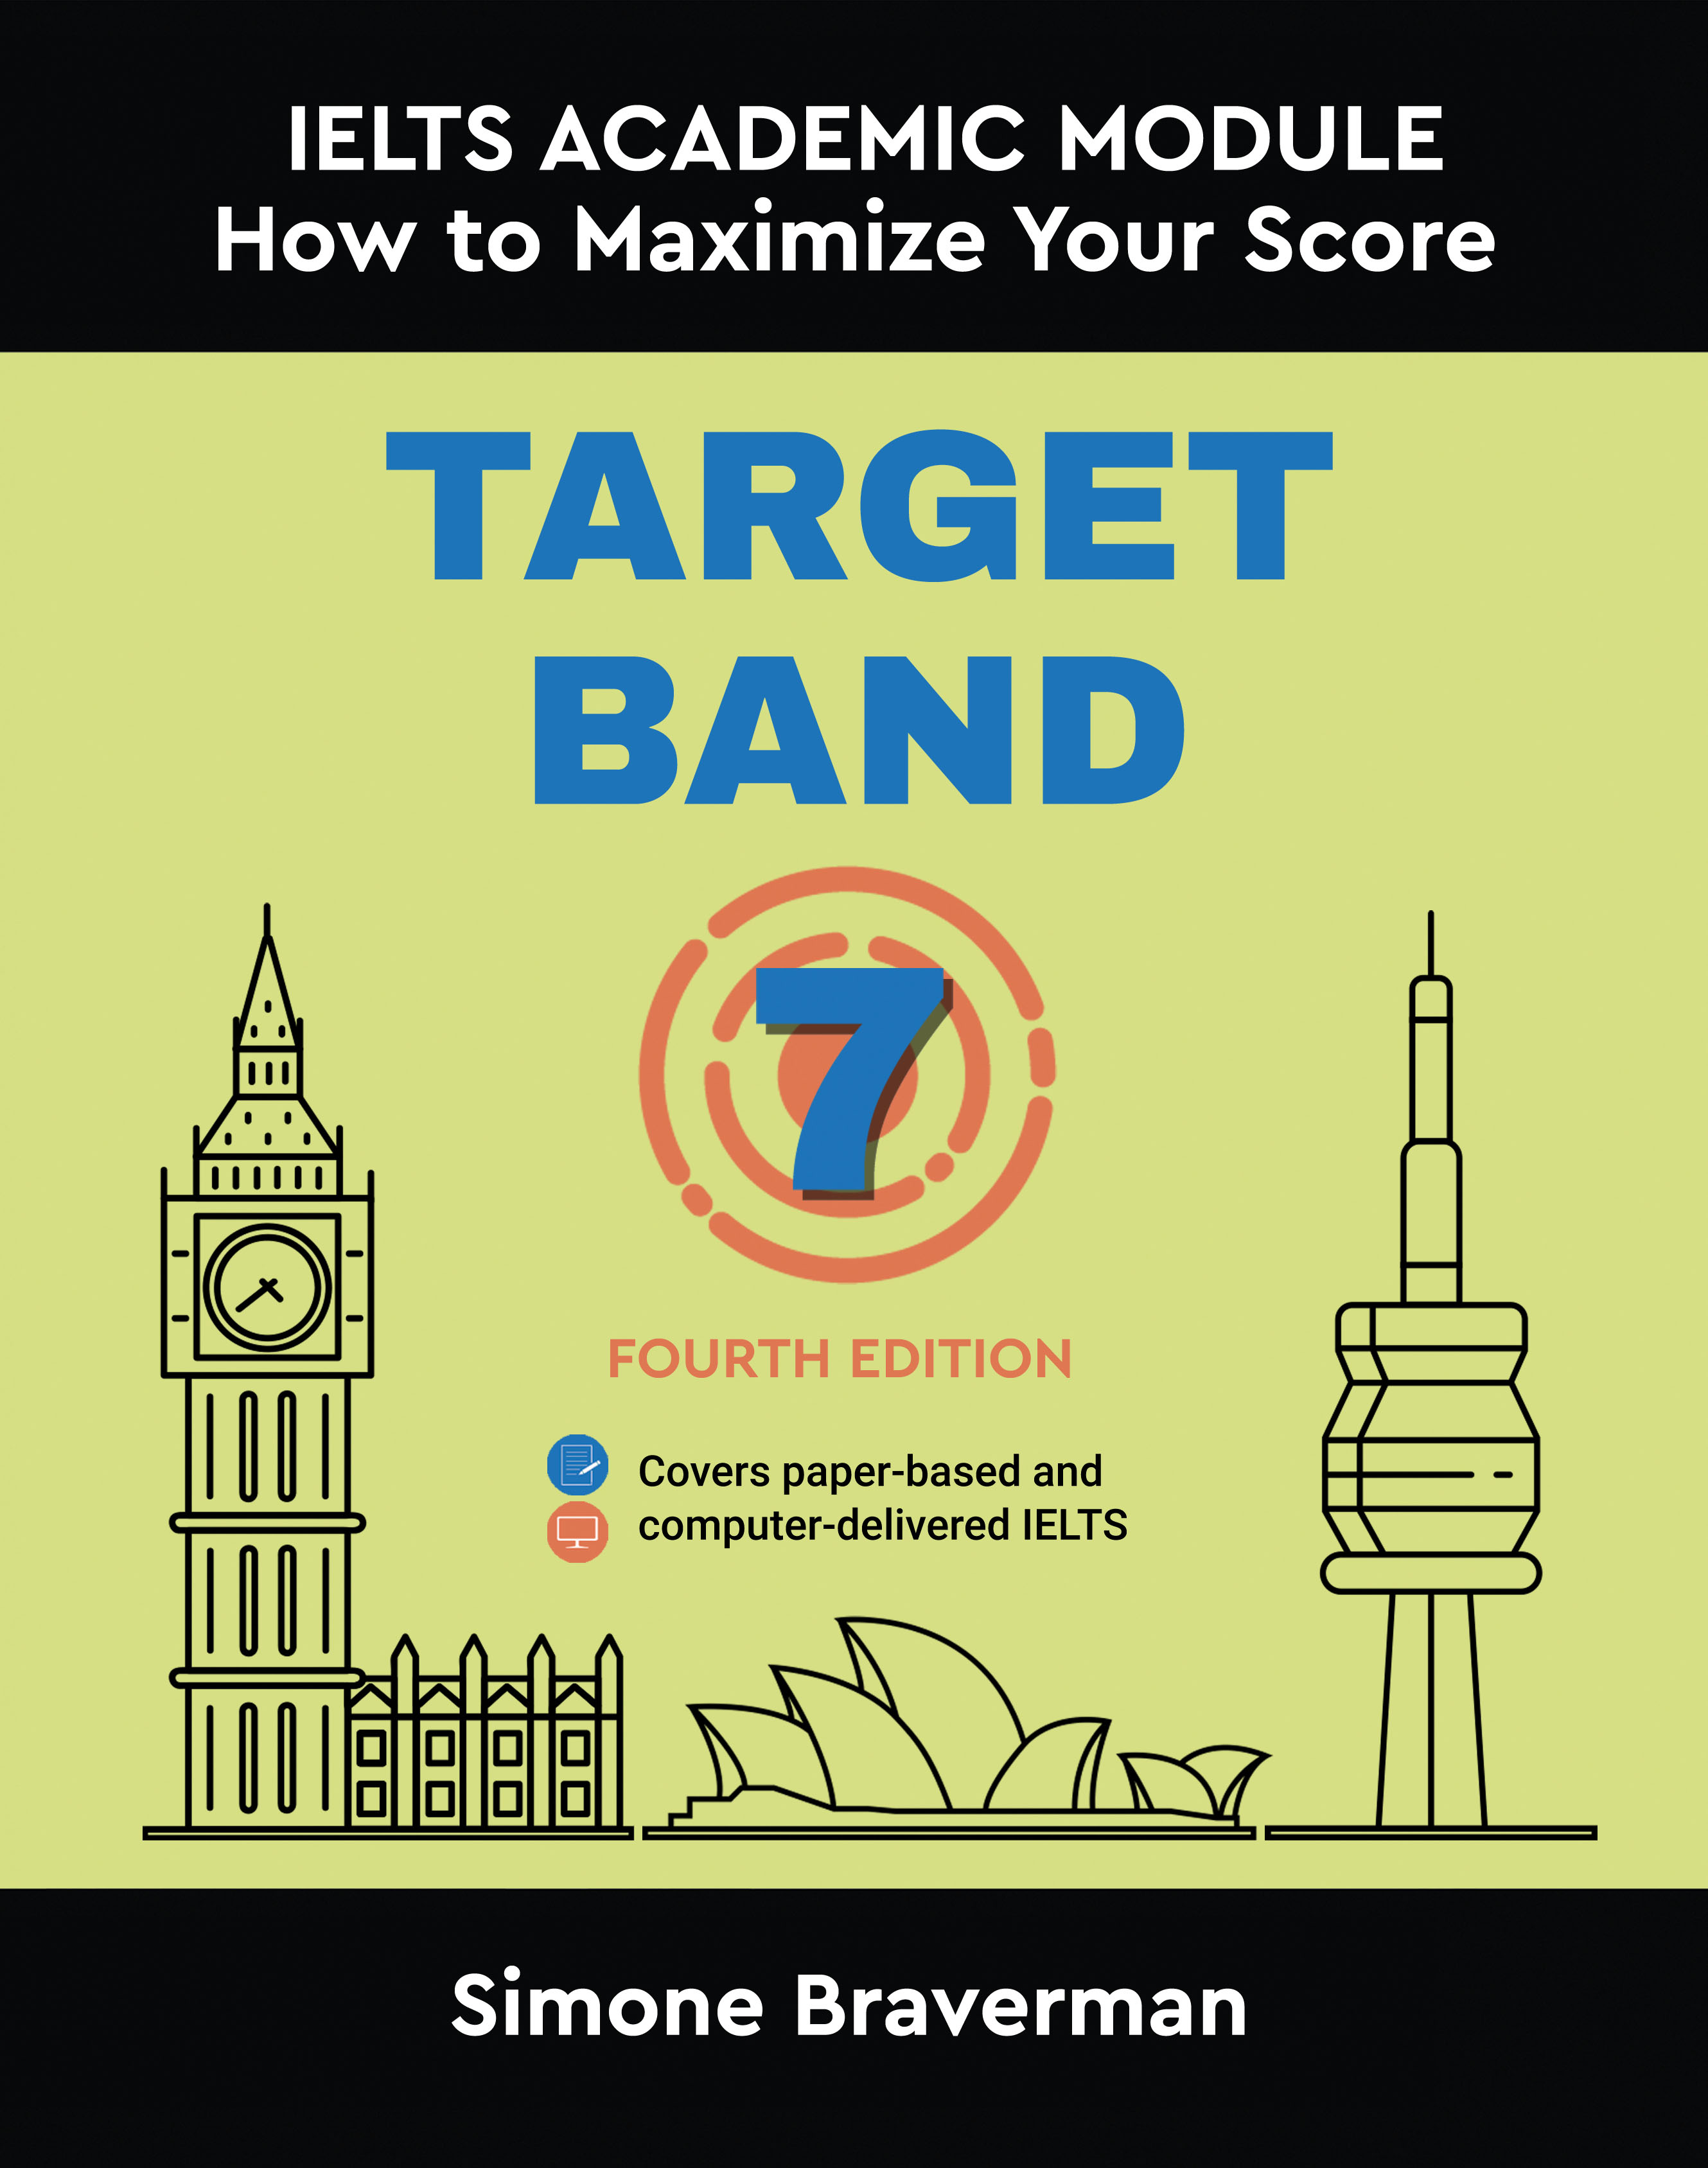 'Target Band 7' book, your guide to a higher score in IELTS